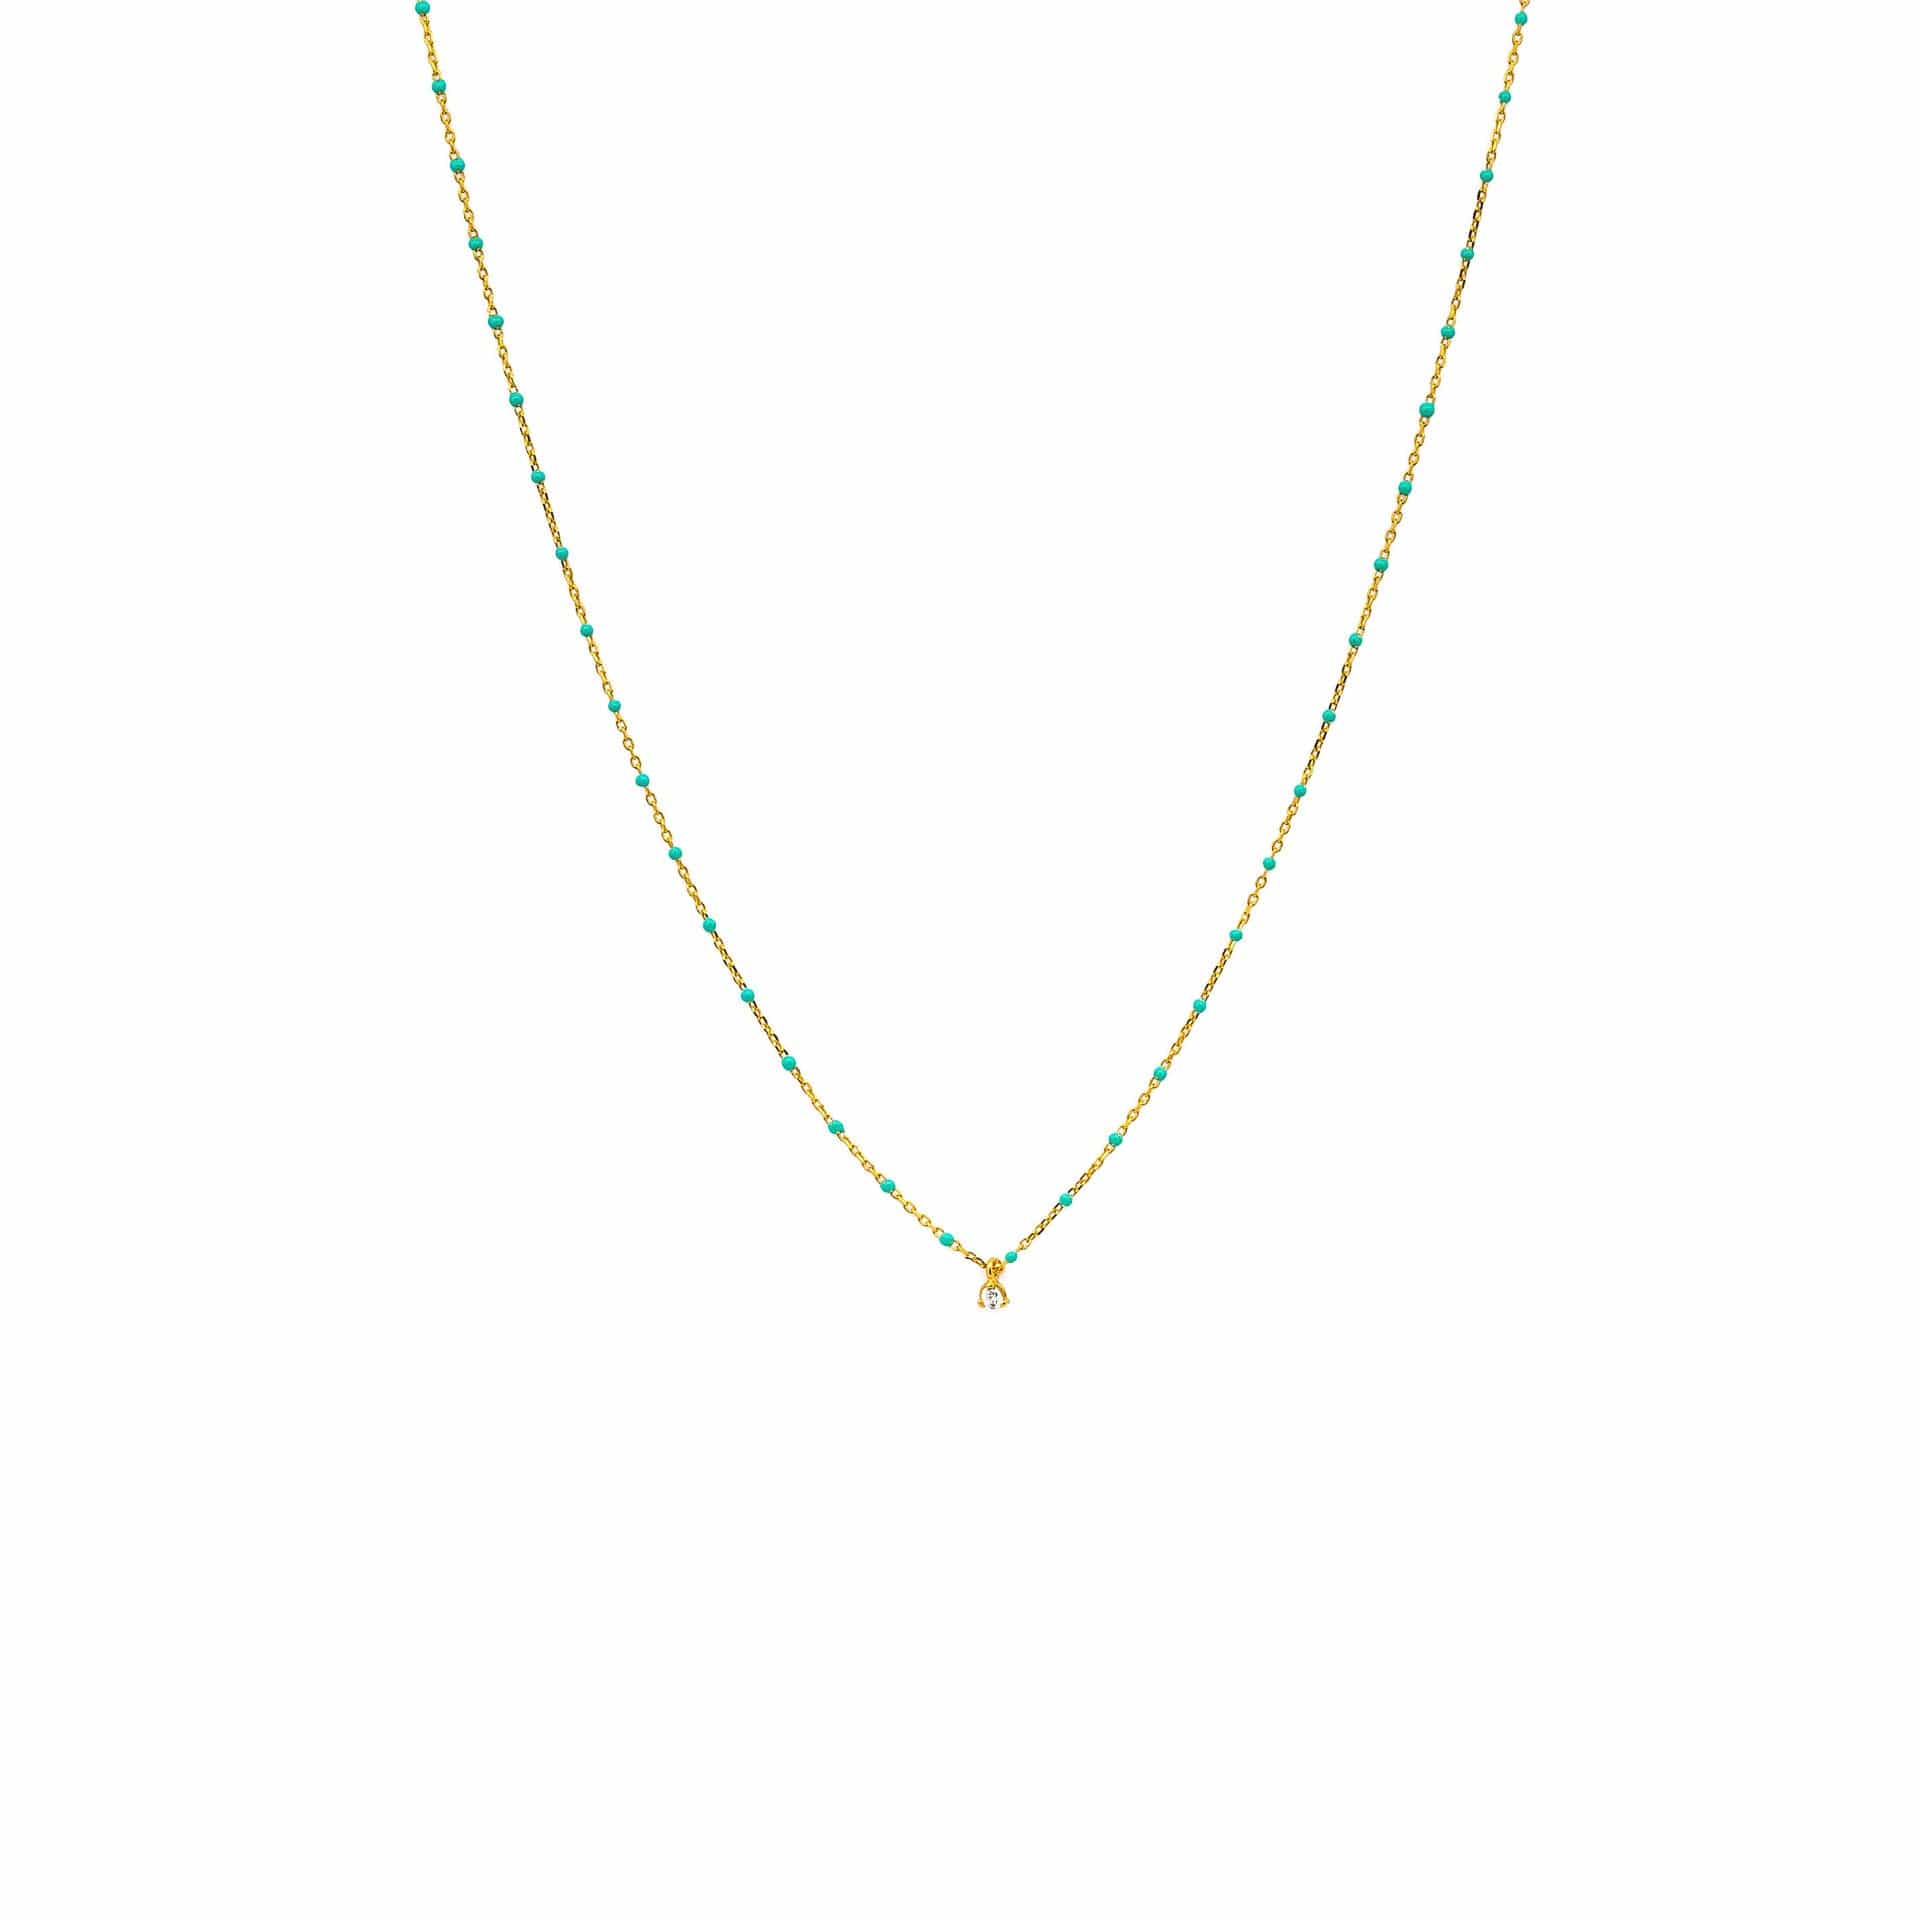 TAI JEWELRY Necklace Gold Vermeil Enamel Necklace With Multiple Cz/Turquoise Stones